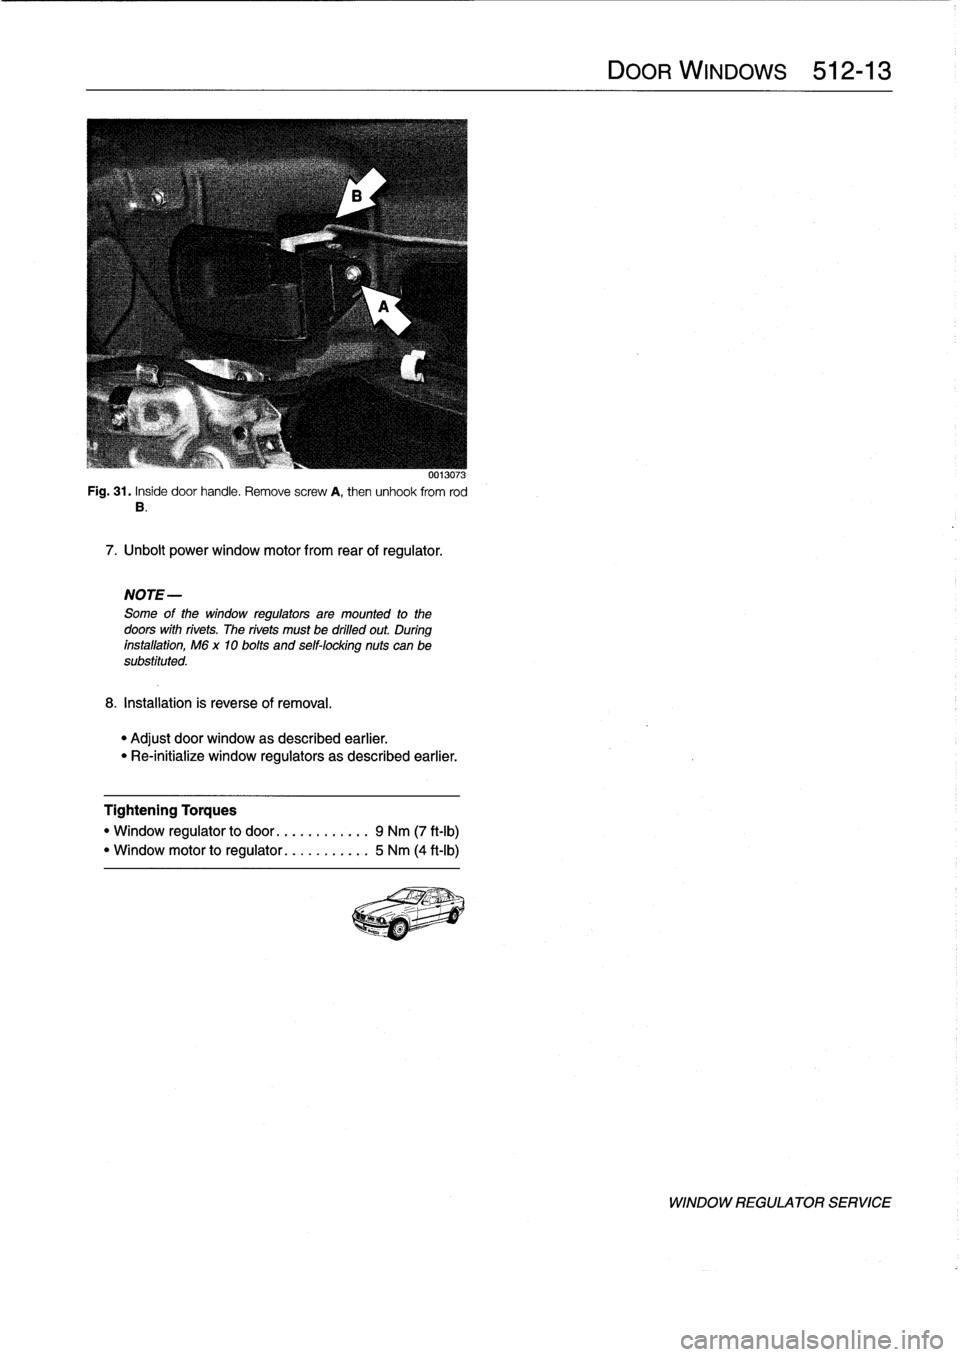 BMW 328i 1997 E36 Workshop Manual 
Fig
.
31
.
Inside
door
handle
.
Remove
screw
A,then
unhook
from
rod
B
.

7
.
Unbolt
power
window
motor
from
rear
of
regulator
.

NOTE-

Some
of
the
window
regulators
are
mounted
to
the
doors
with
riv